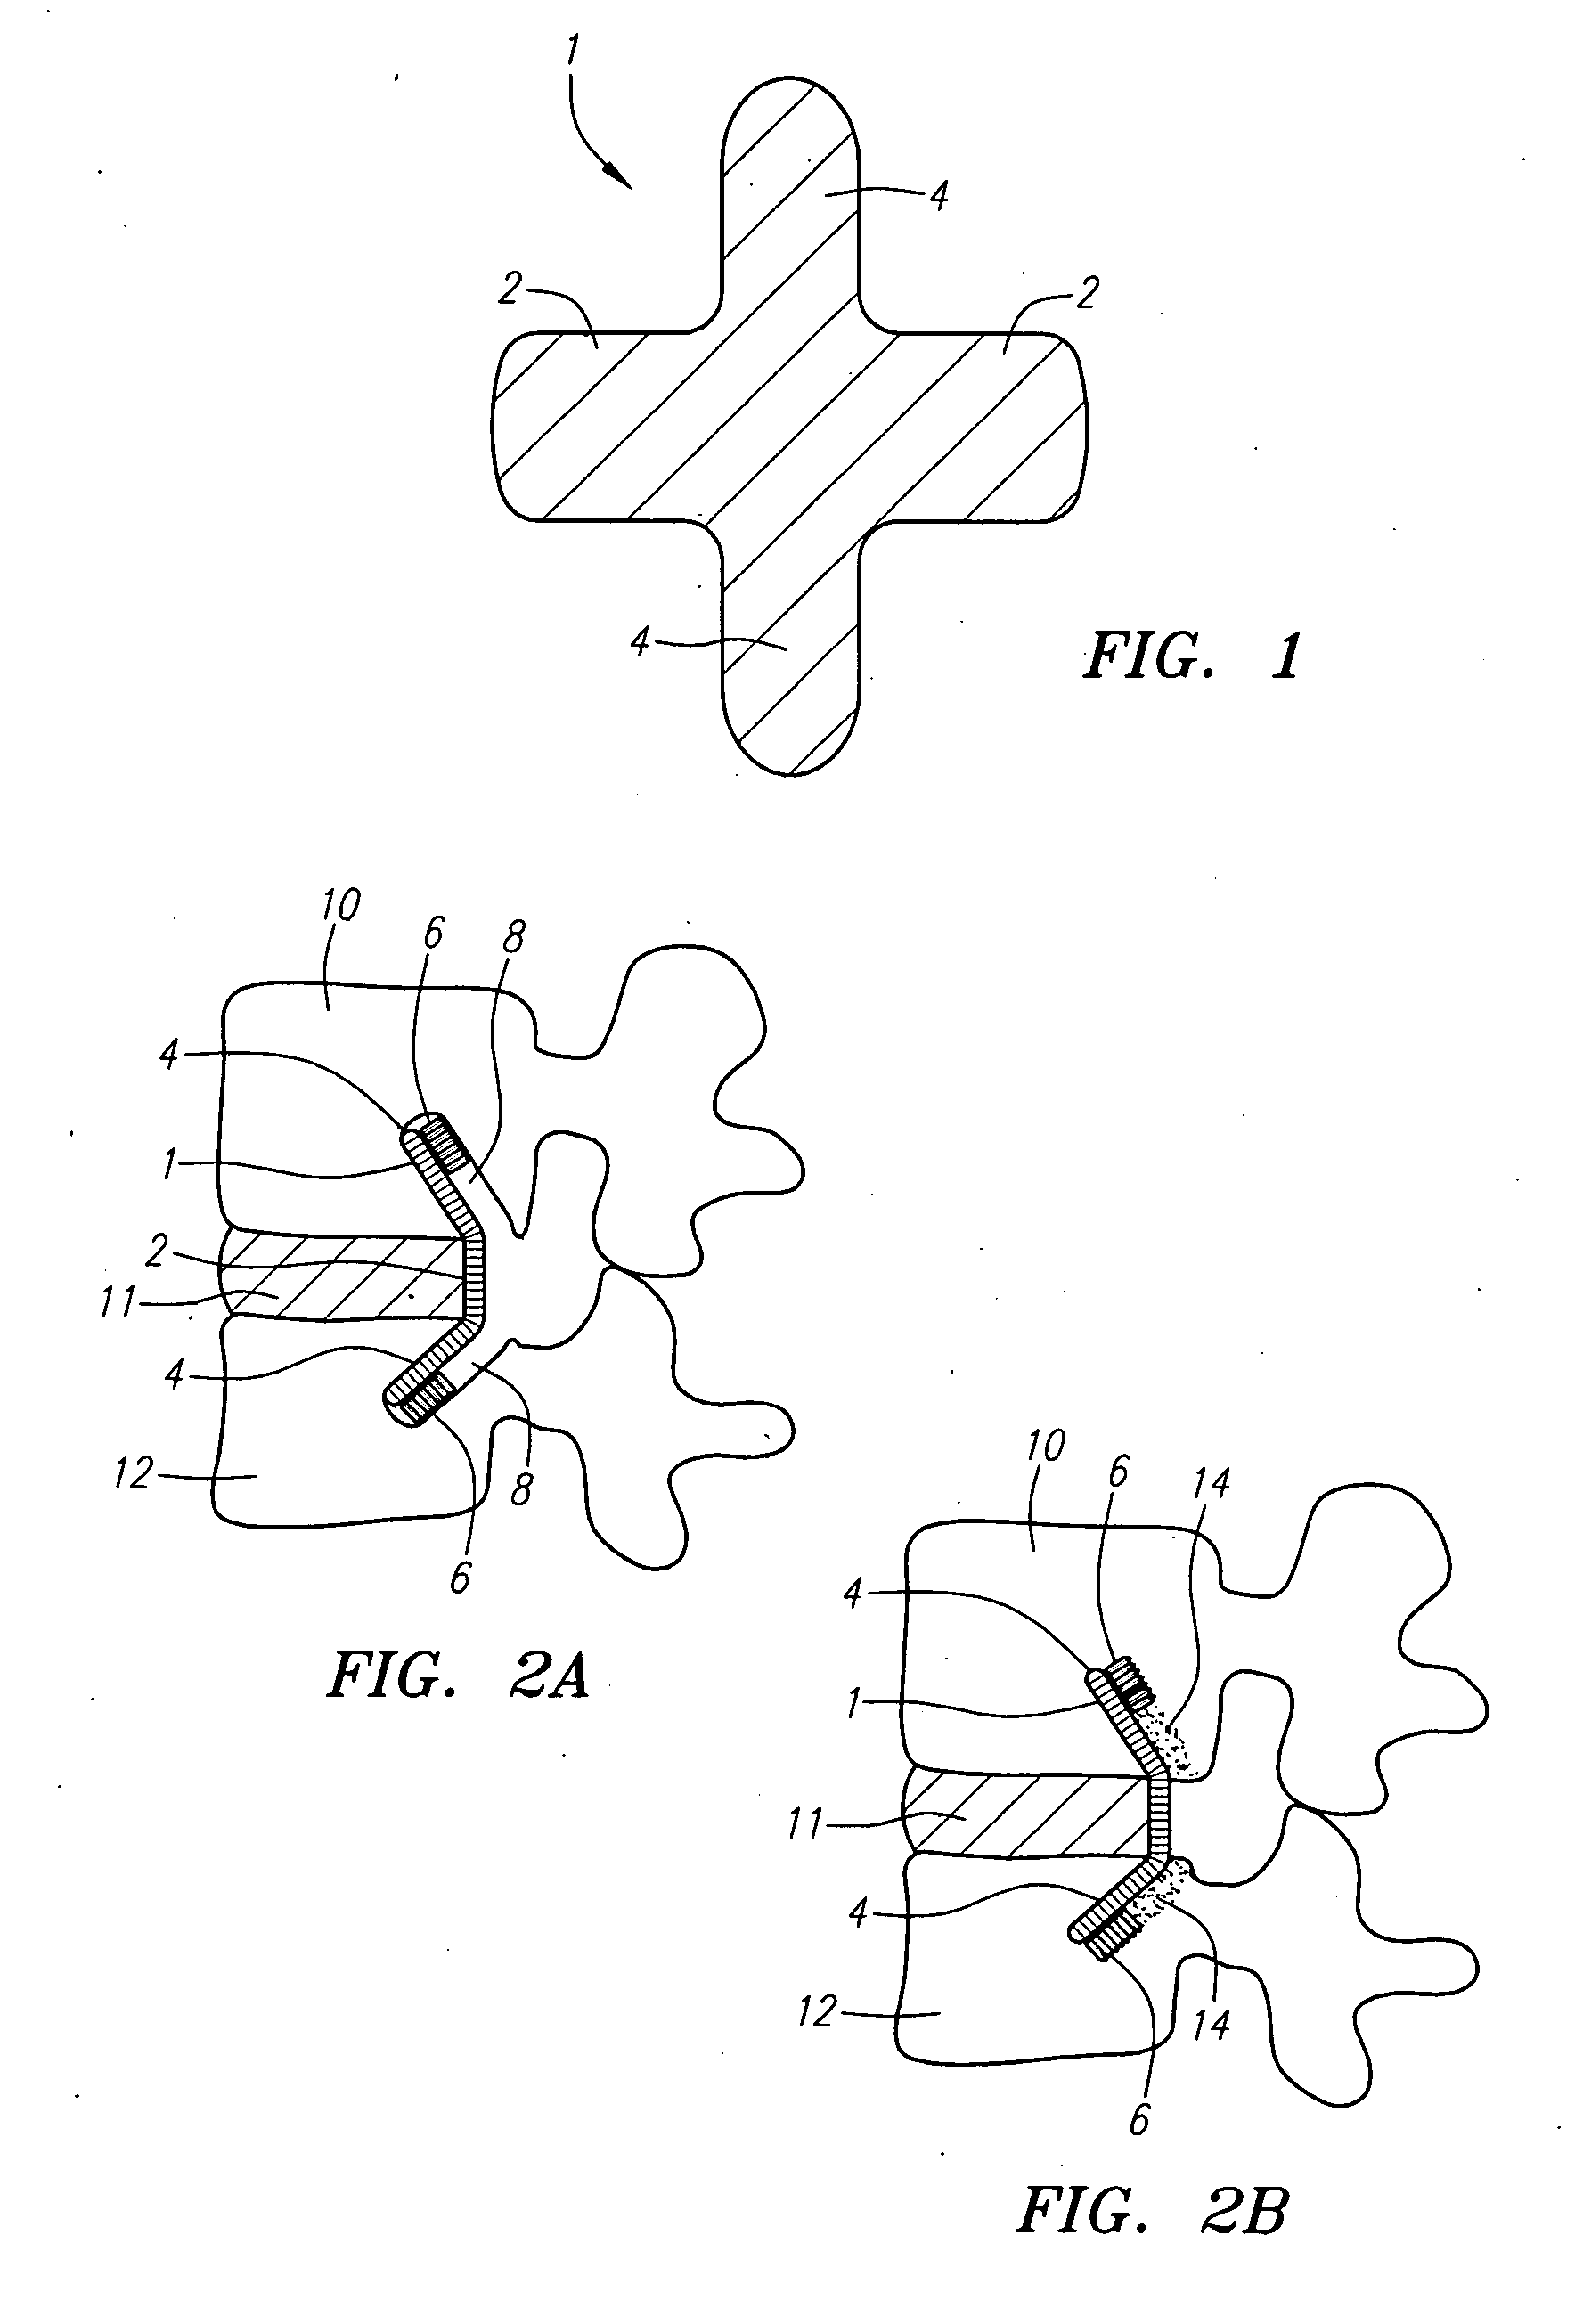 Methods and apparatus for reconstructing the anulus fibrosus